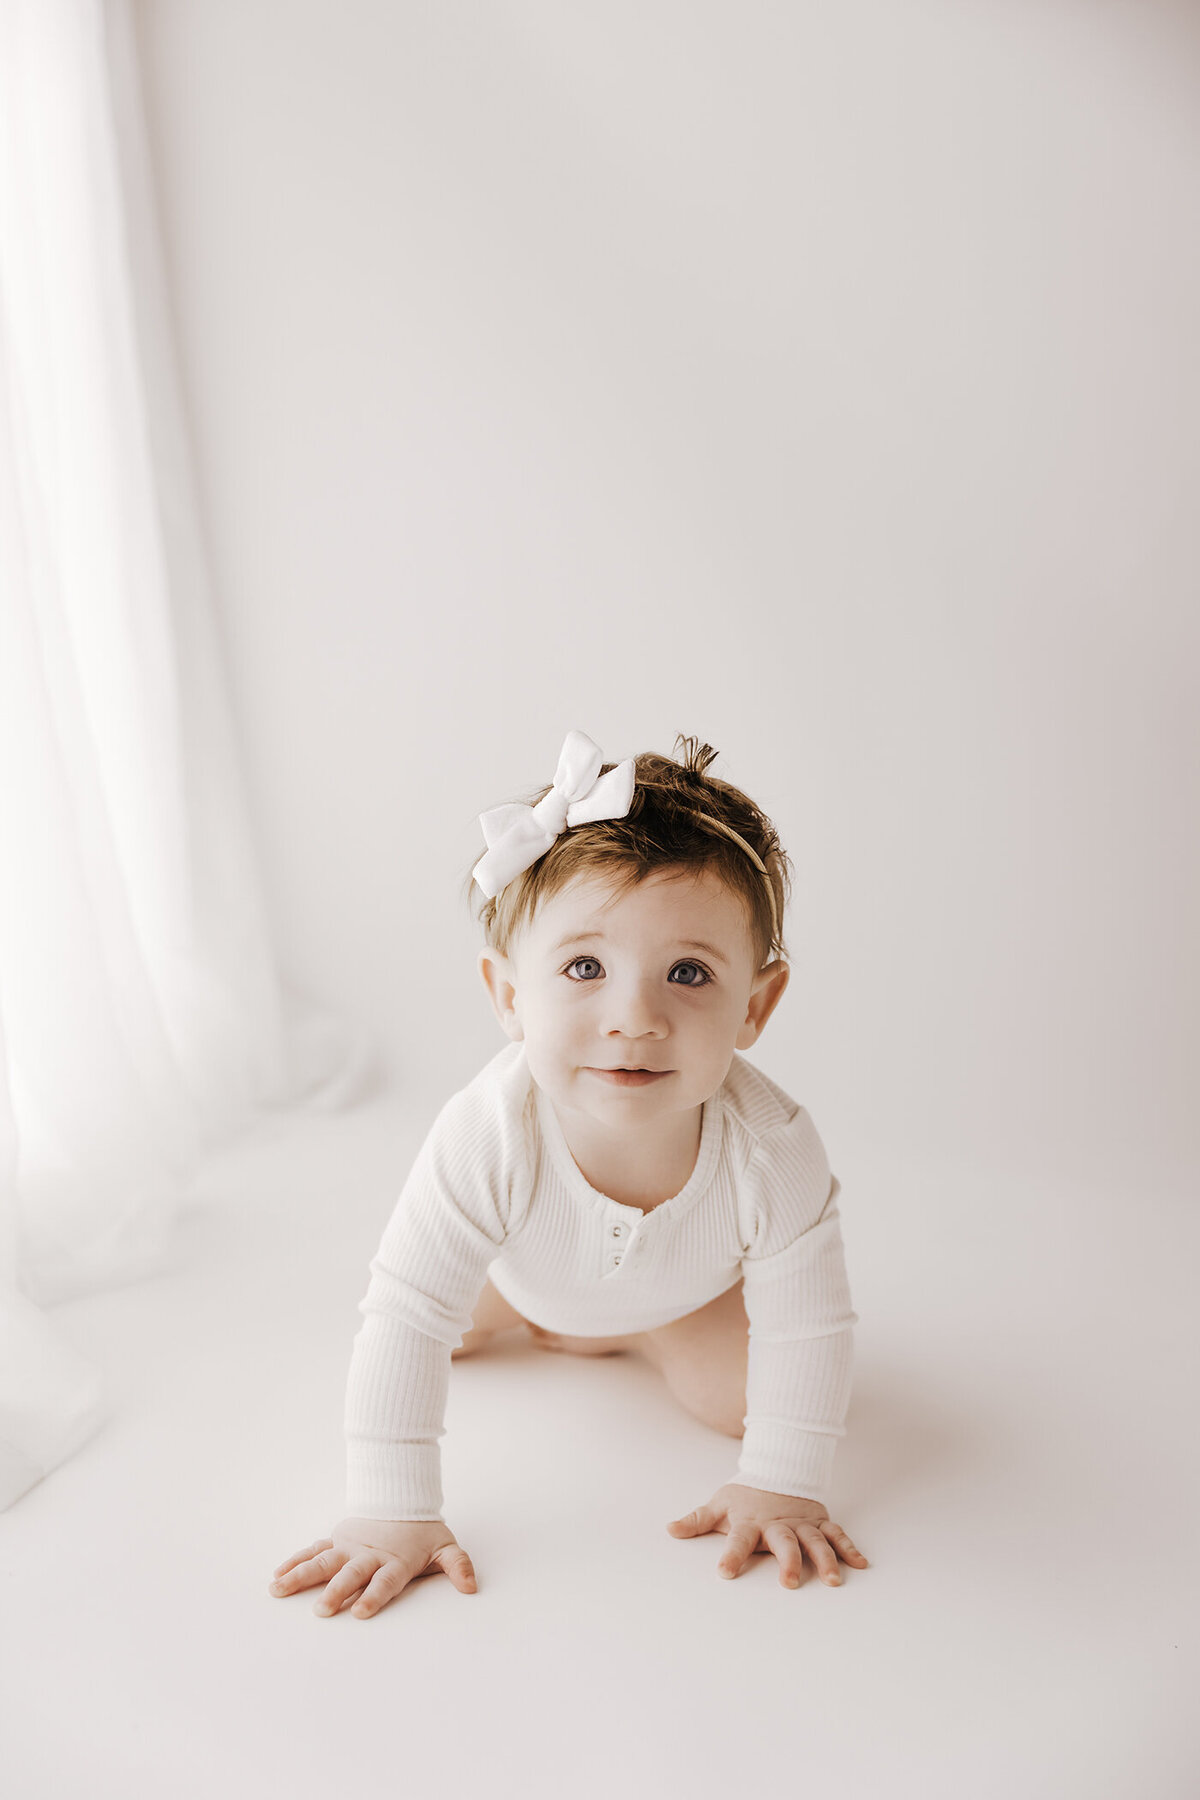 little girl crawling in white outfit on white backdrop